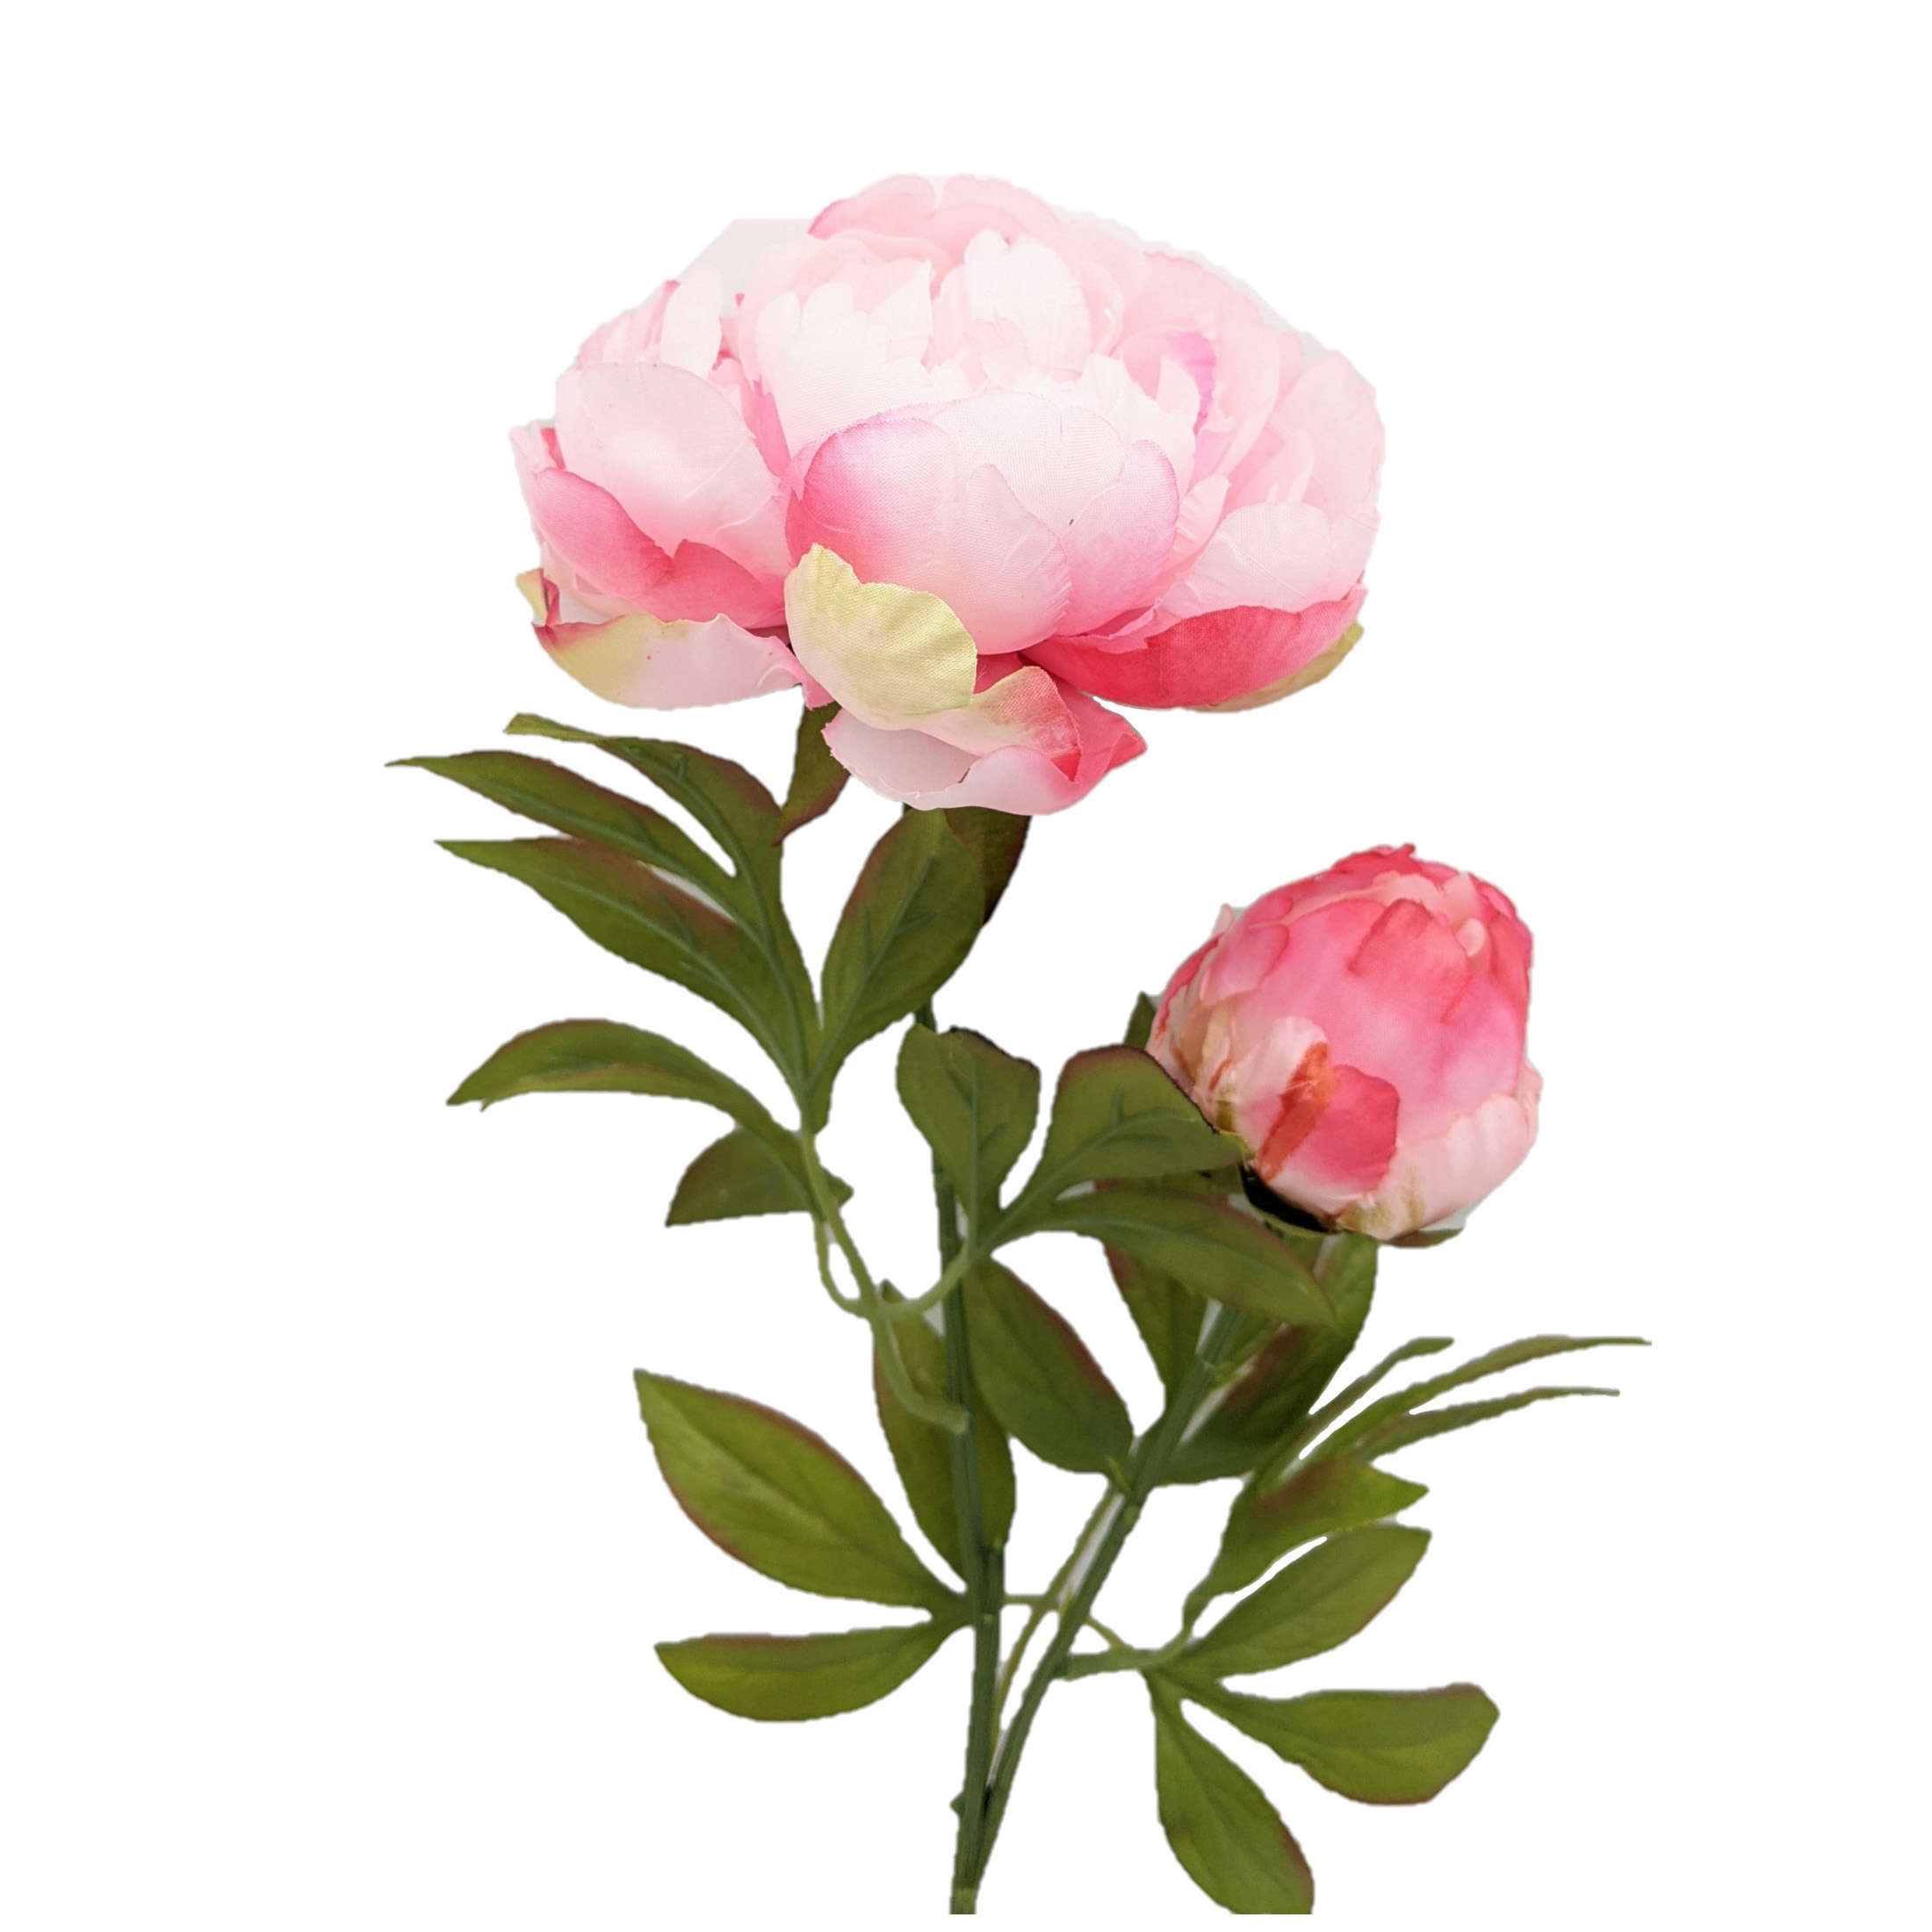 Mainstays 27" Tall Artificial Pink Peony Flower Indoor Stem - image 3 of 5